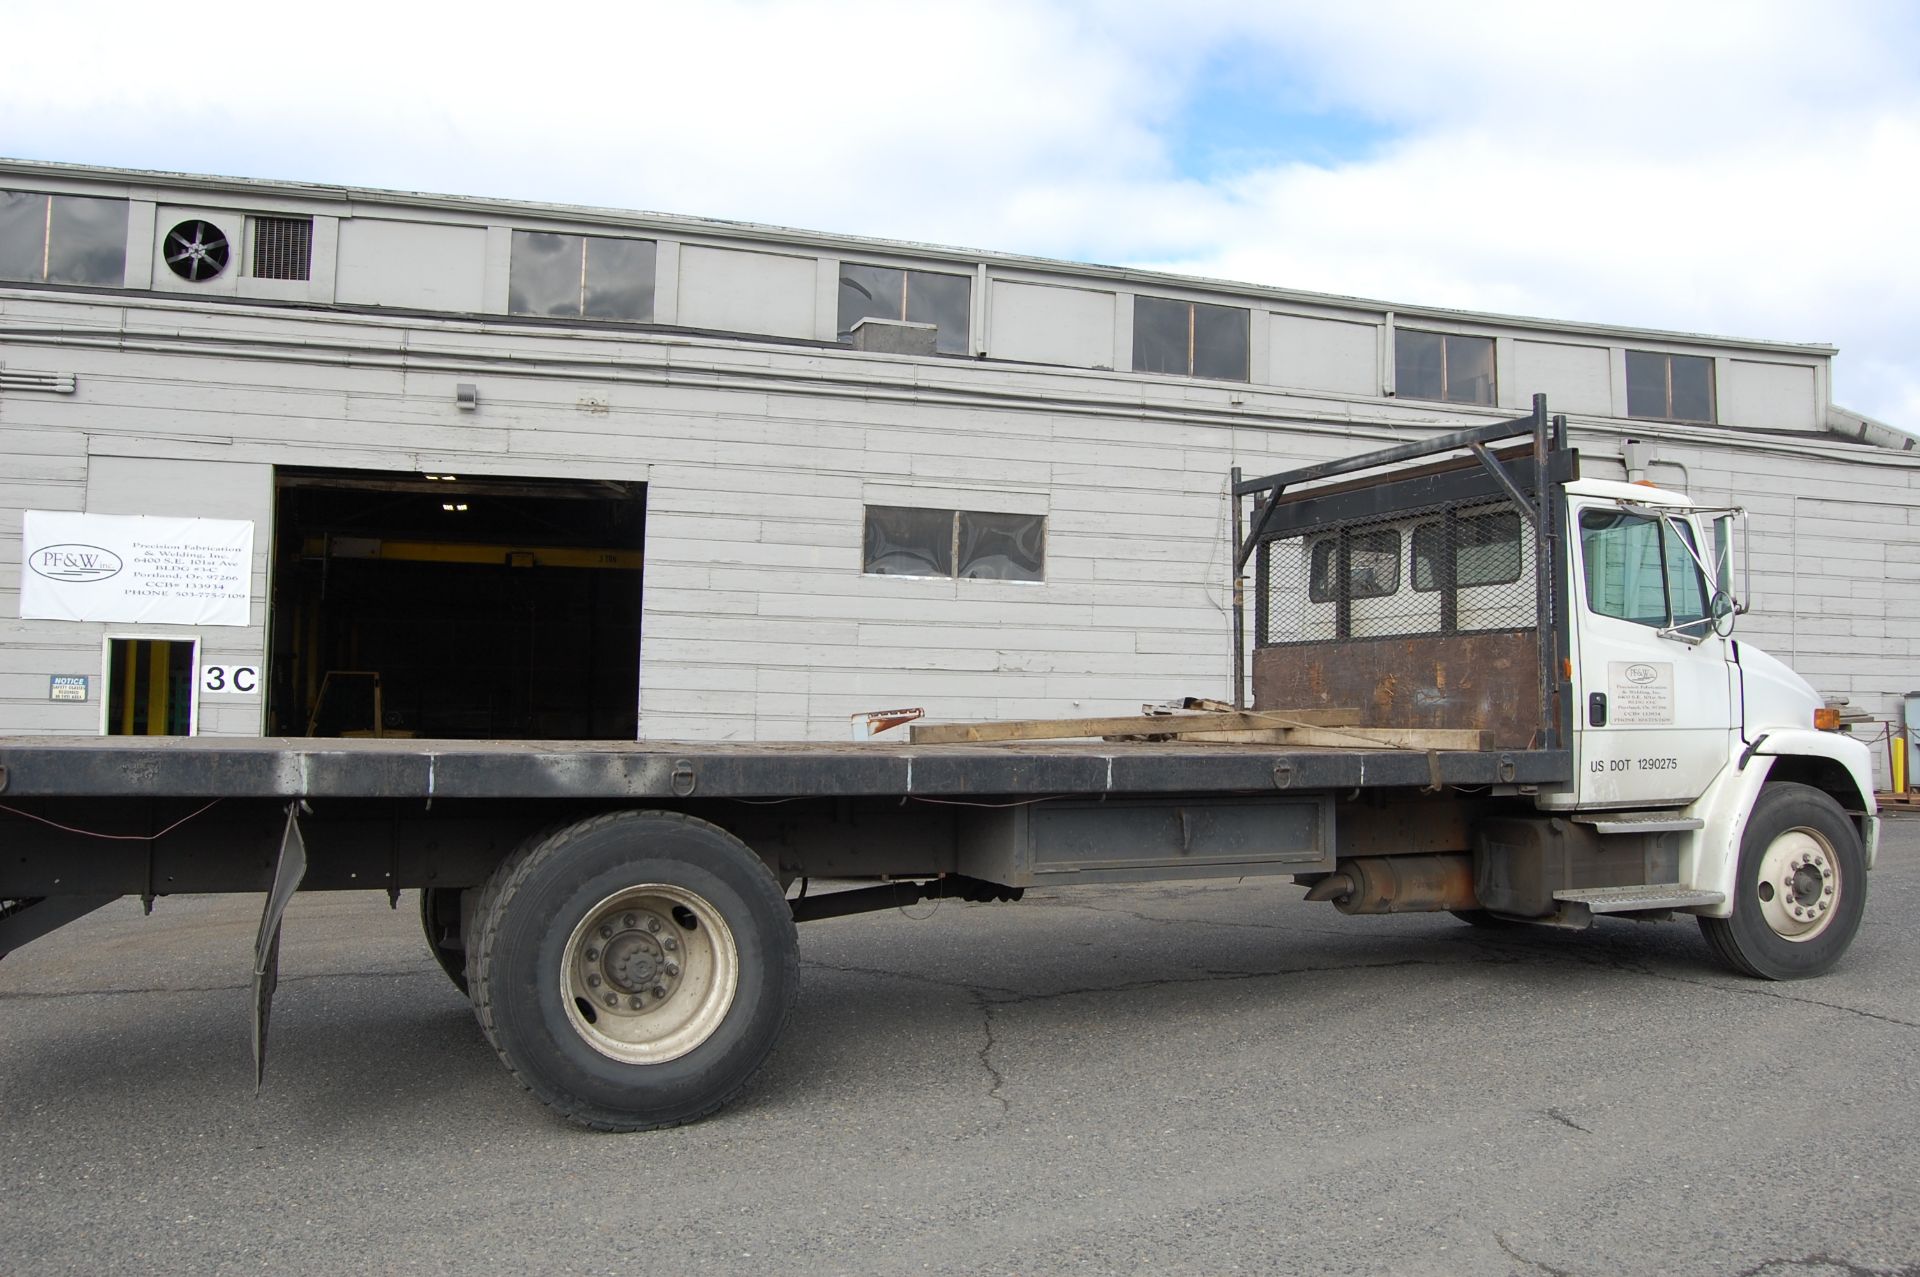 1996 Freightliner F70 20' Tandem axle Flatbed Truck 6 speed manual transmission - Image 7 of 8